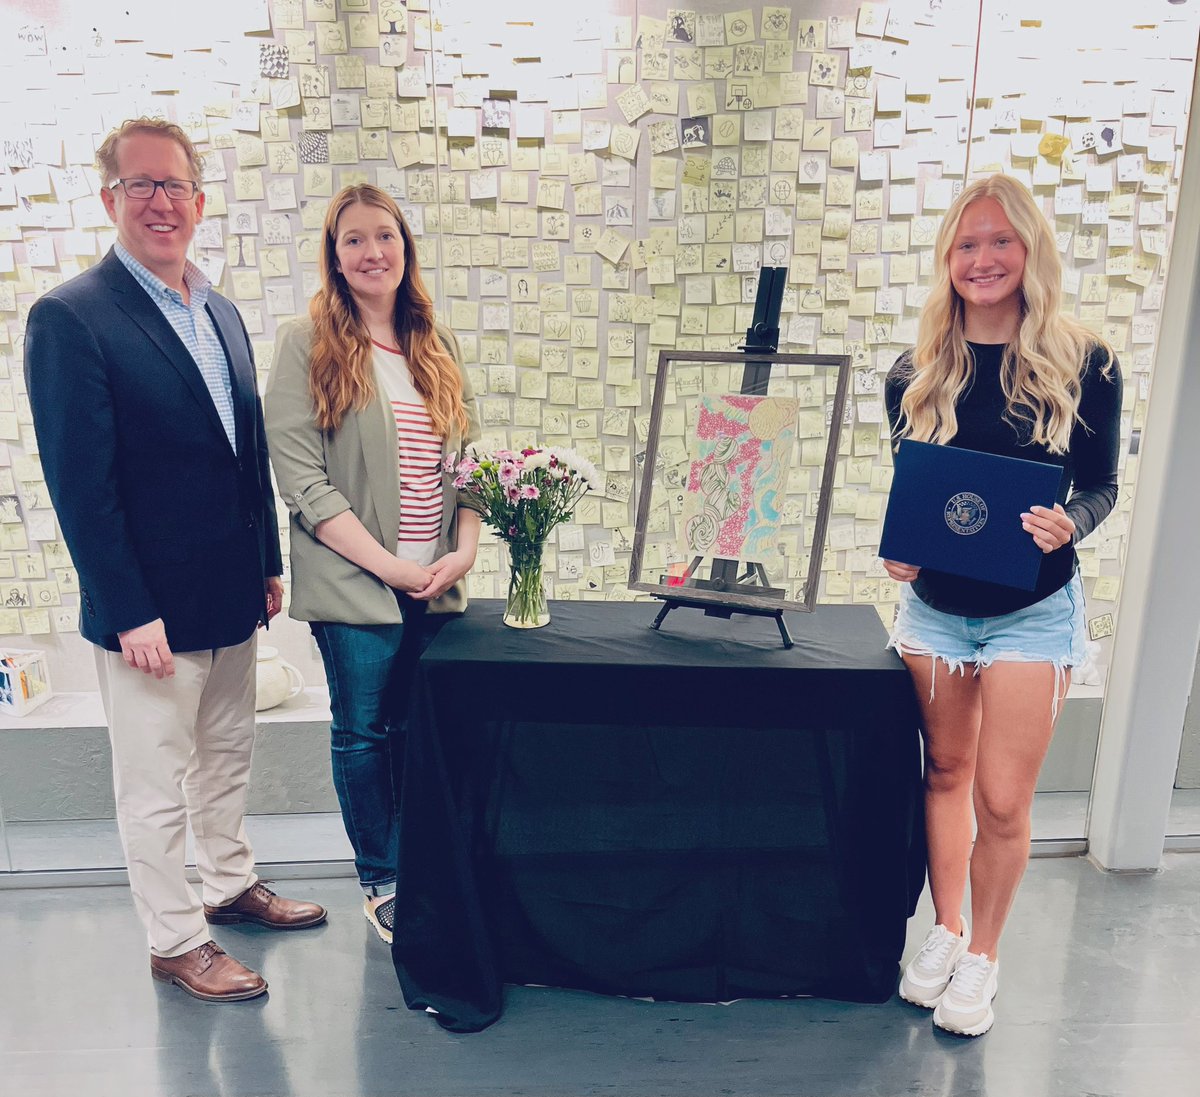 Congratulations to Kearney Public Schools student Keeley Krohn their recognition as a 2024 Congressional Art Competition honoree!